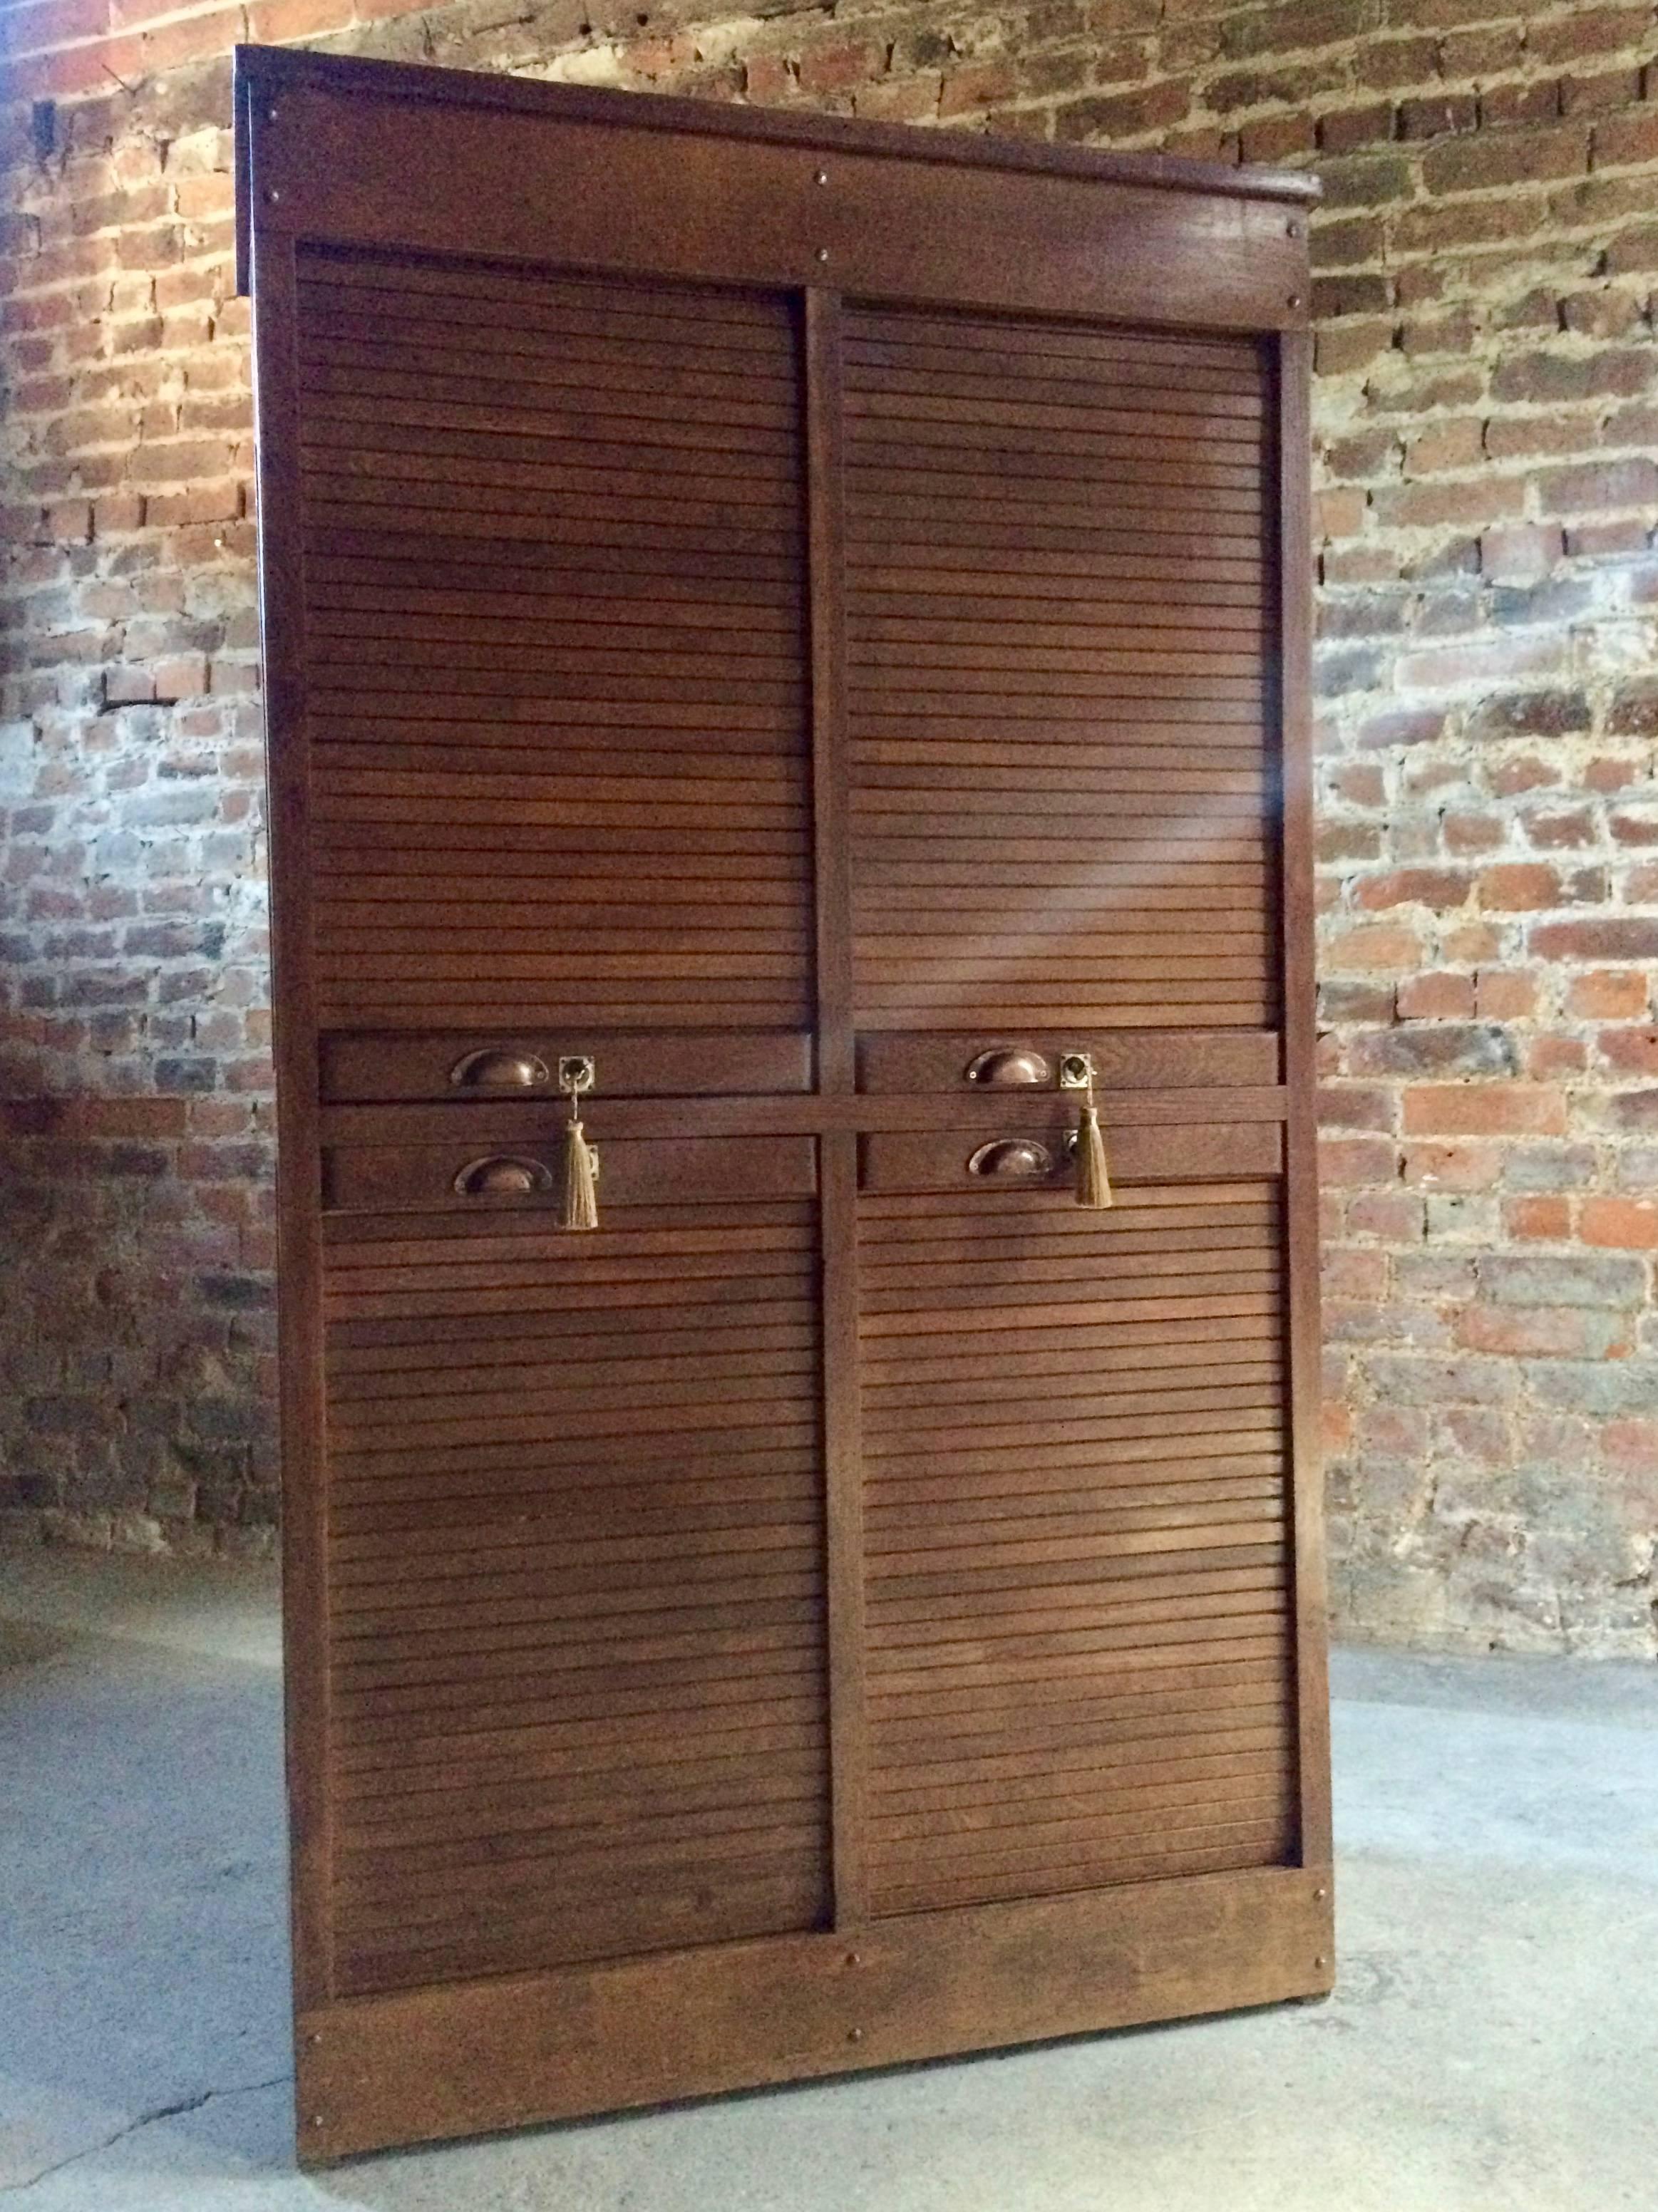 Haberdashery Tambour Fronted Oak Cabinet Four-Section Vintage In Excellent Condition In Longdon, Tewkesbury